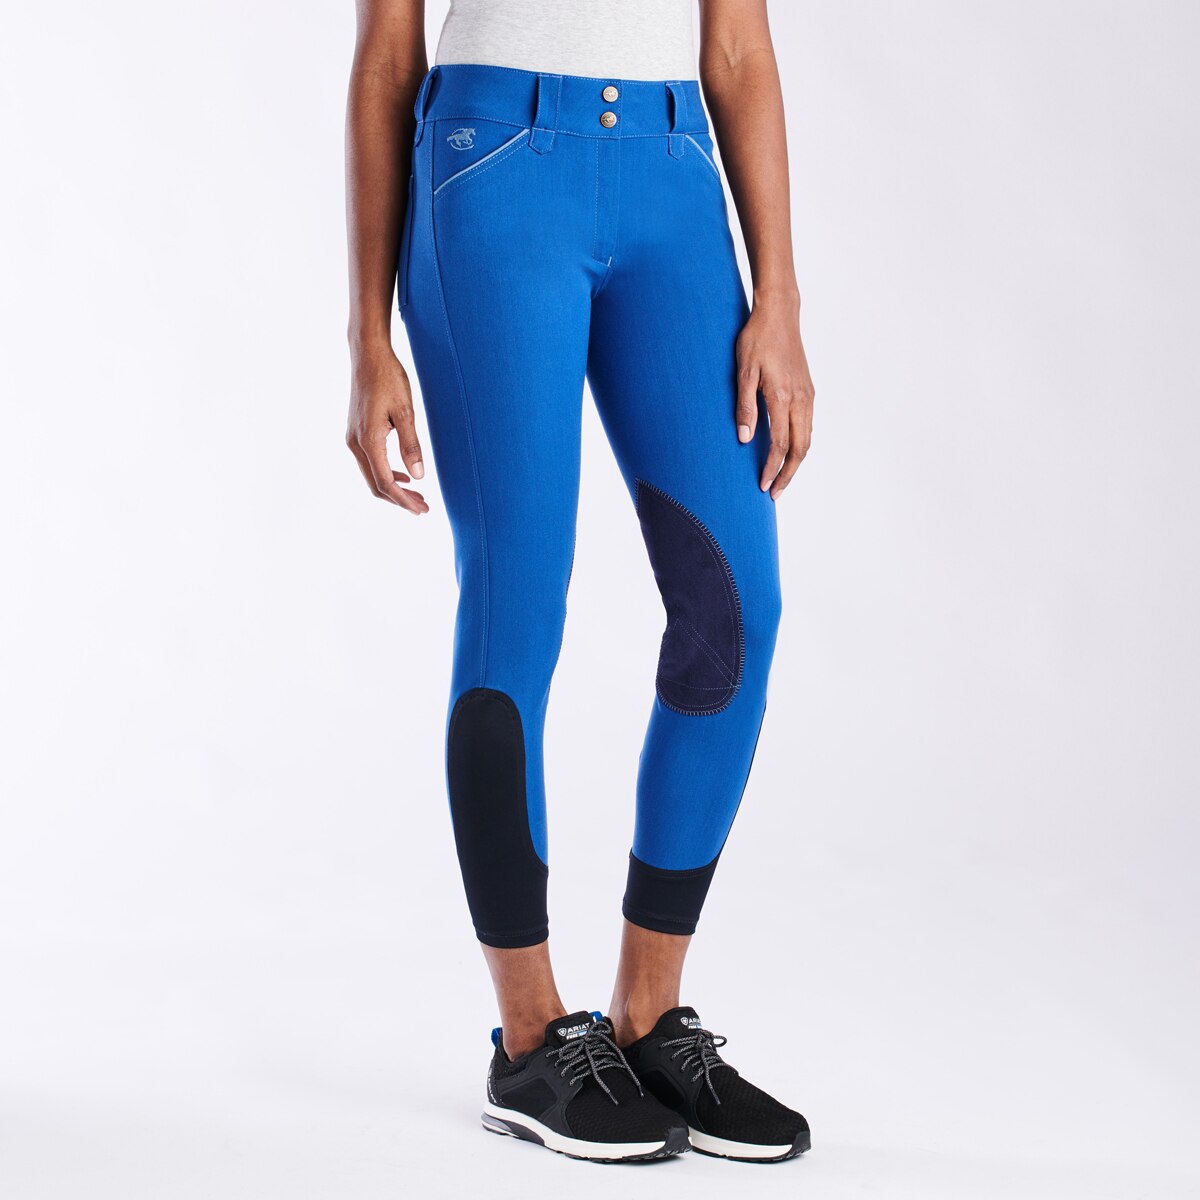 Piper Original Low-rise Breeches by SmartPak - Knee Patch